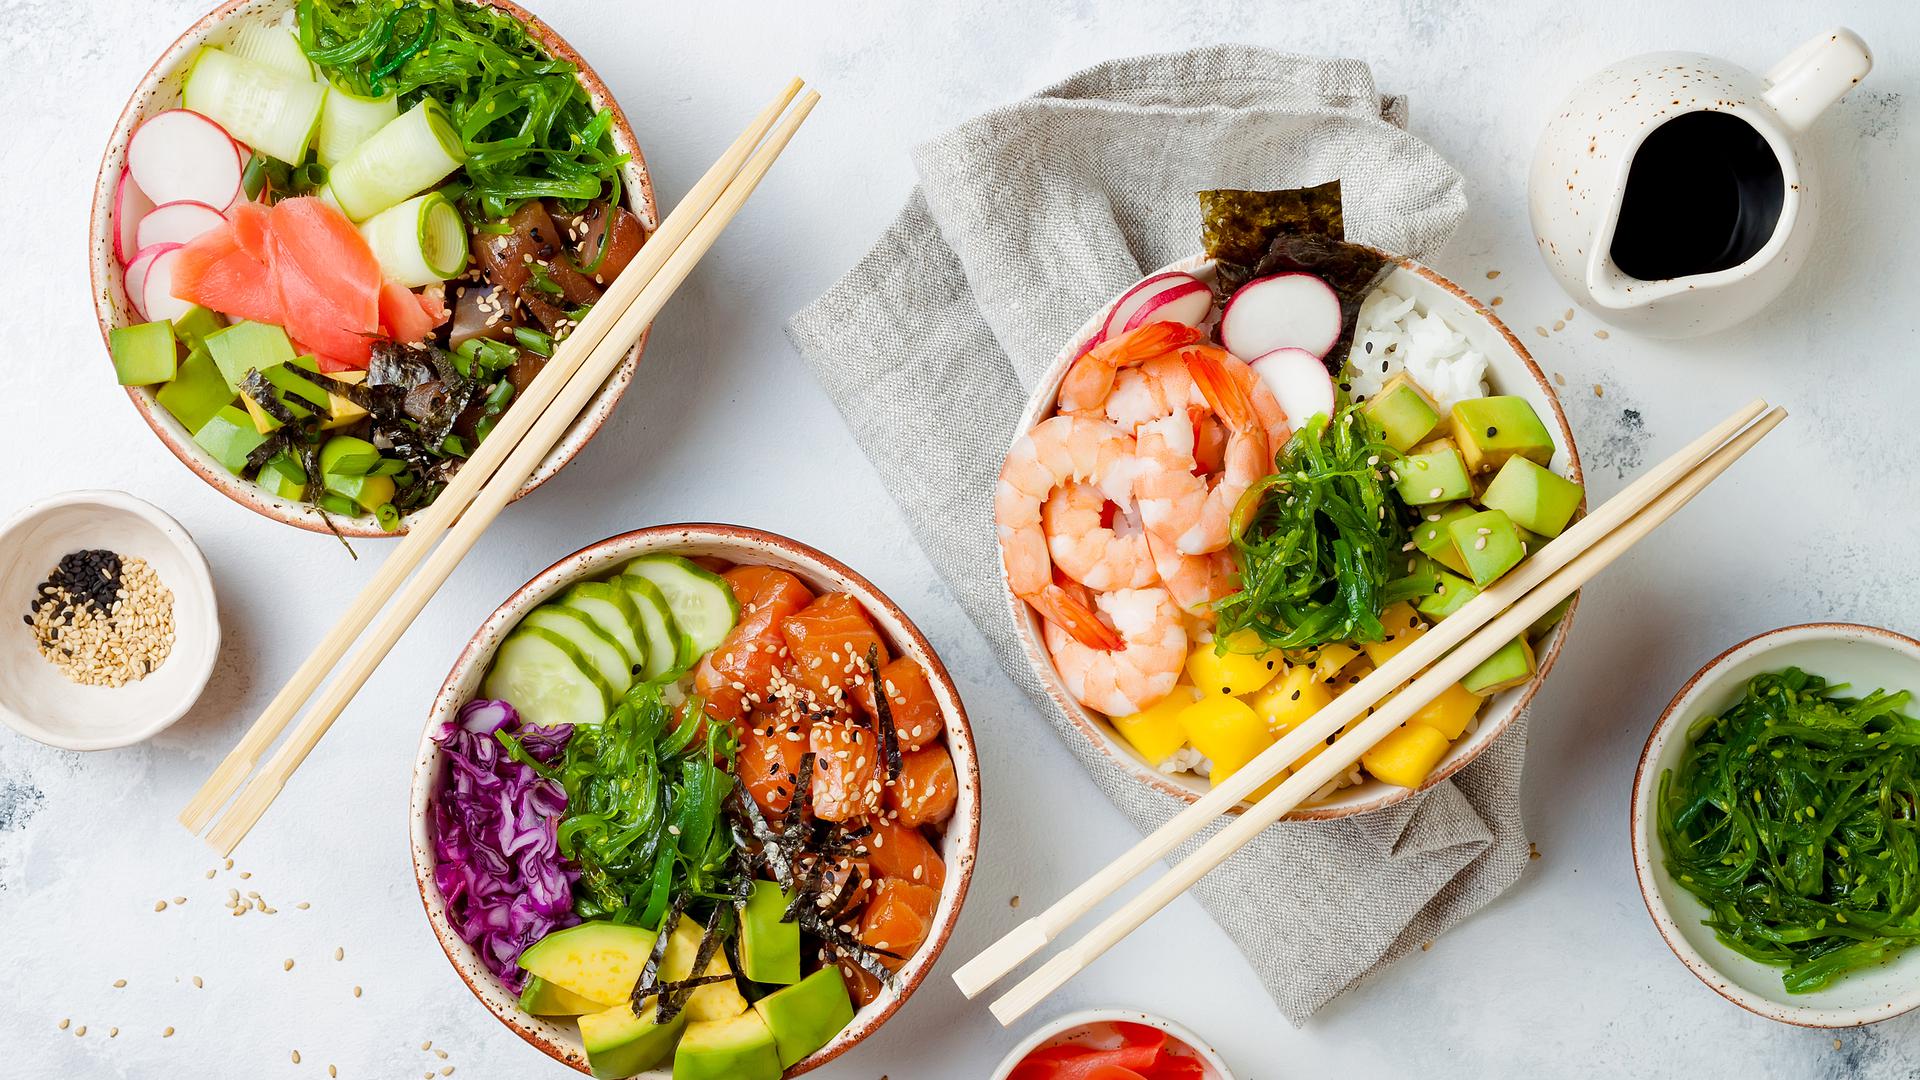 A number of places in Luxembourg offer Poke bowls to go, and you can choose your own ingredients